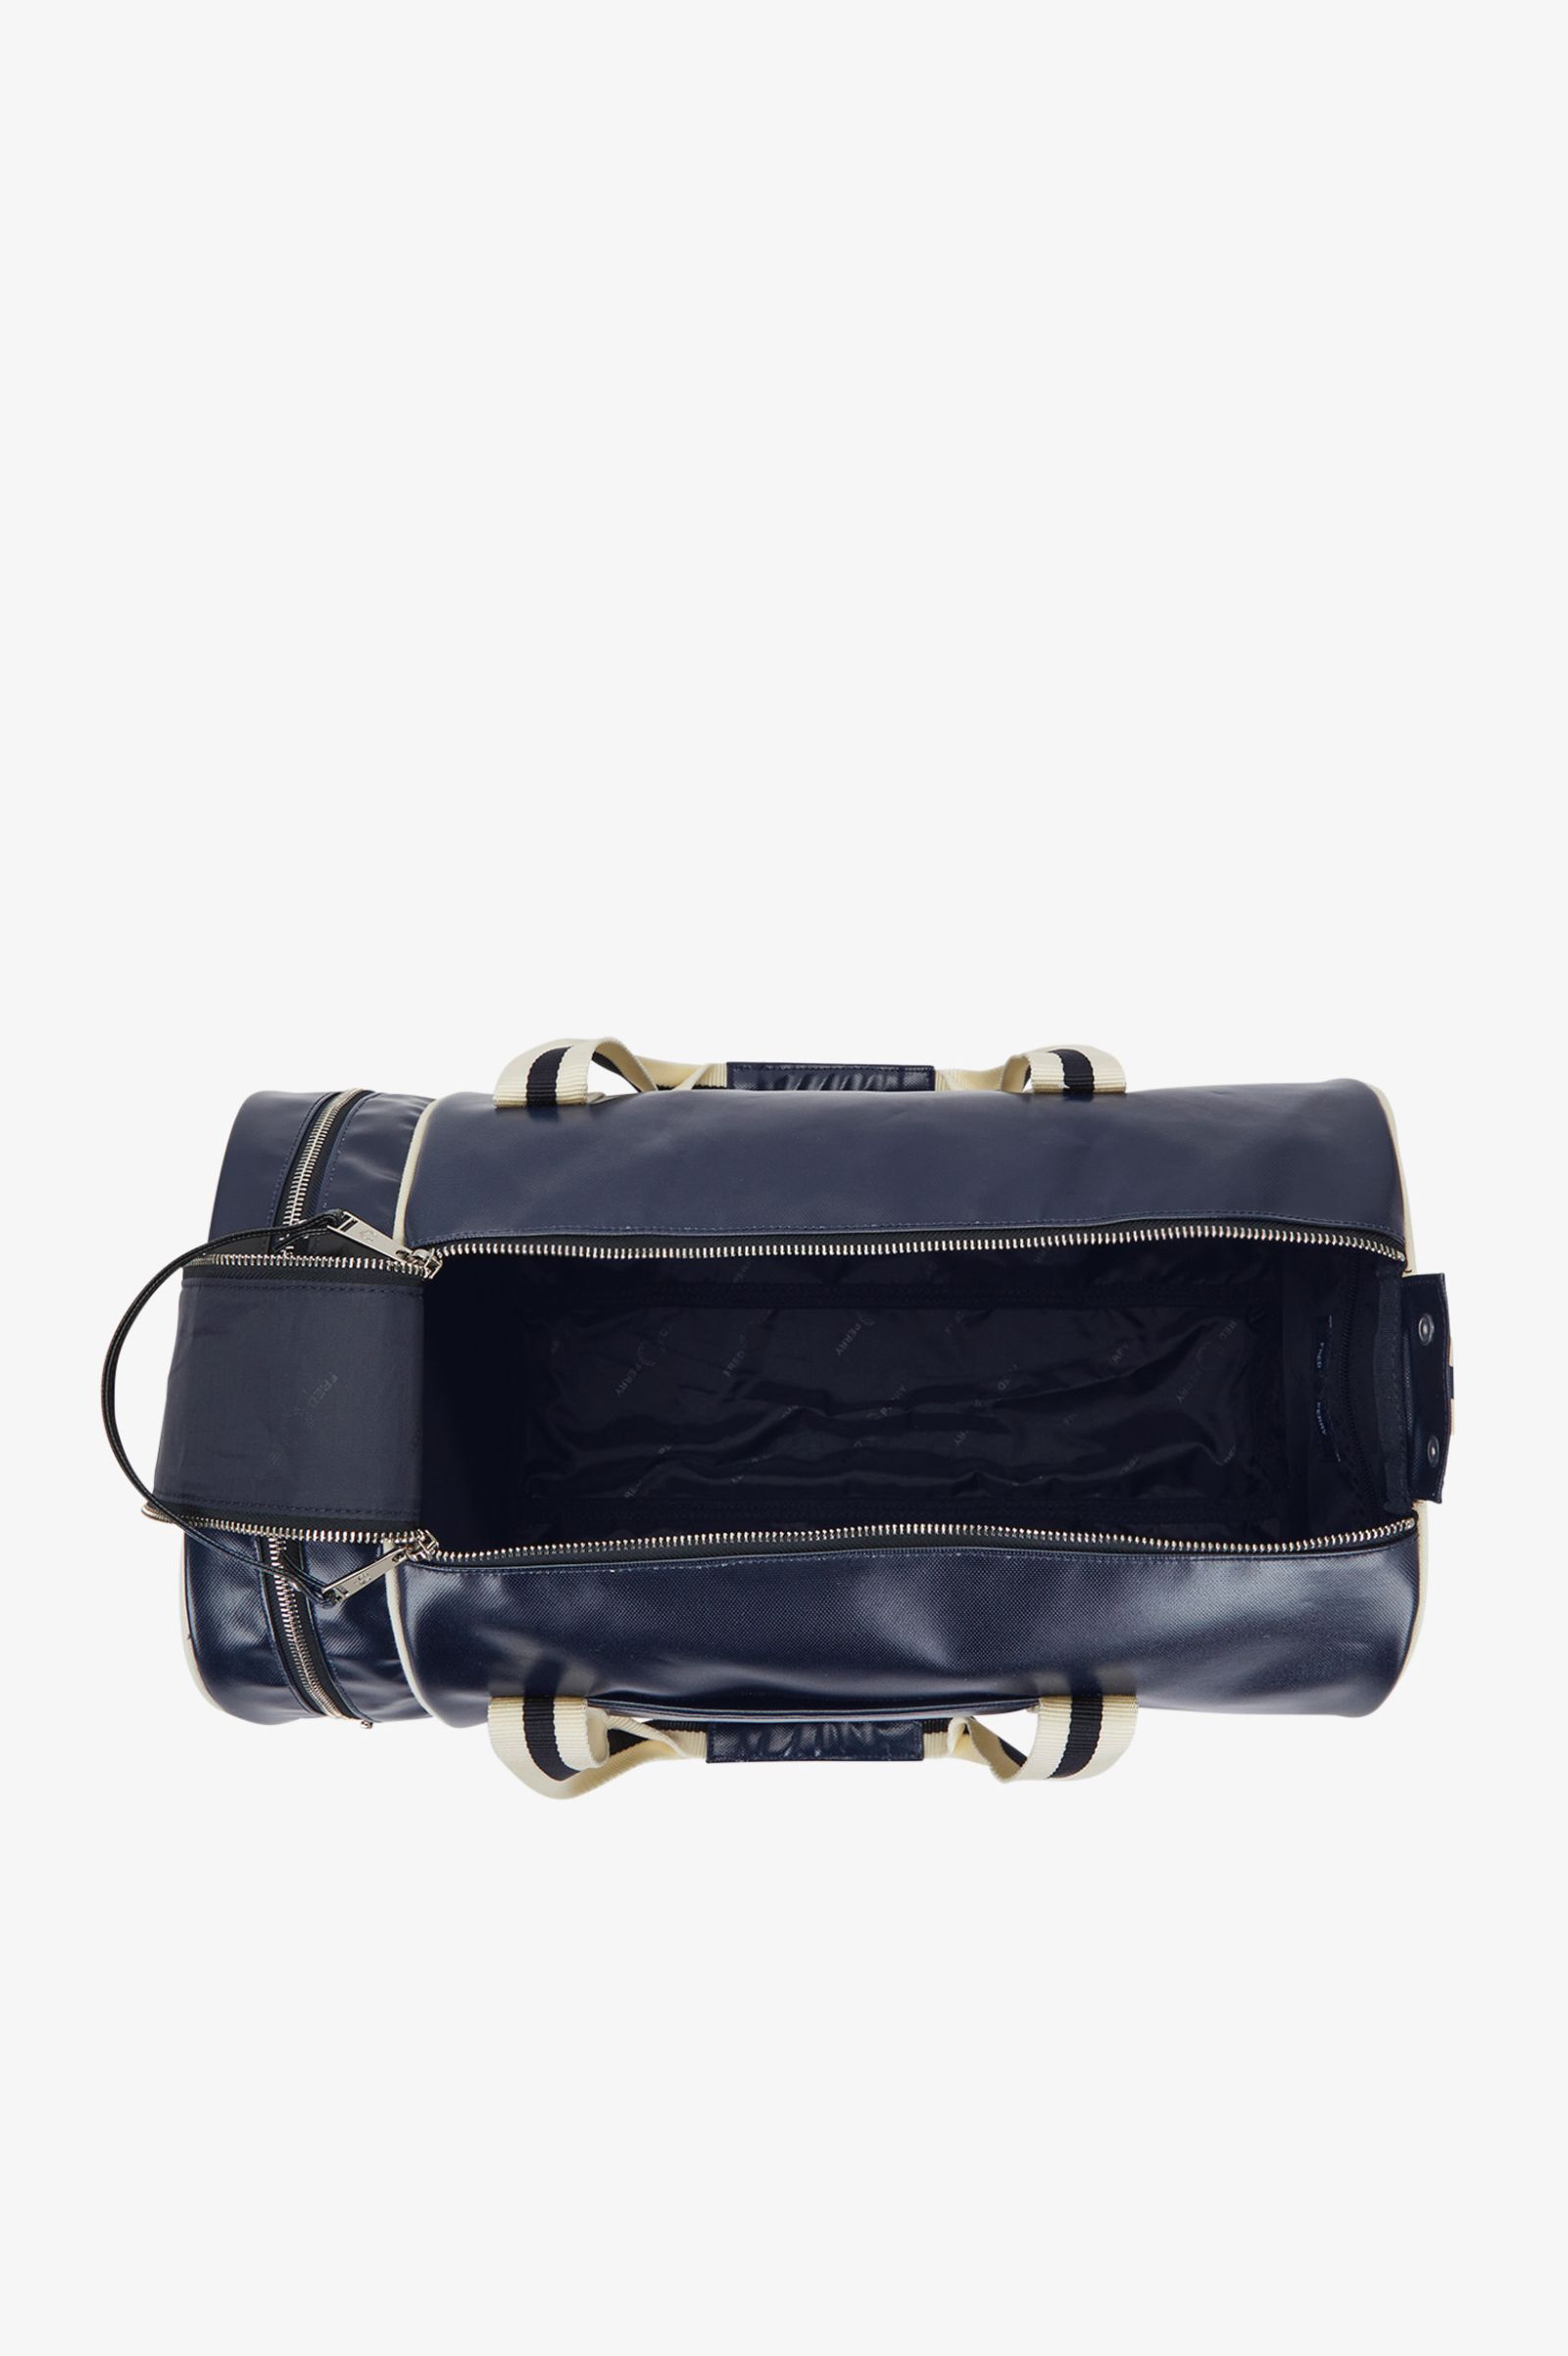 Fred Perry Classic Barrel Bag in Navy